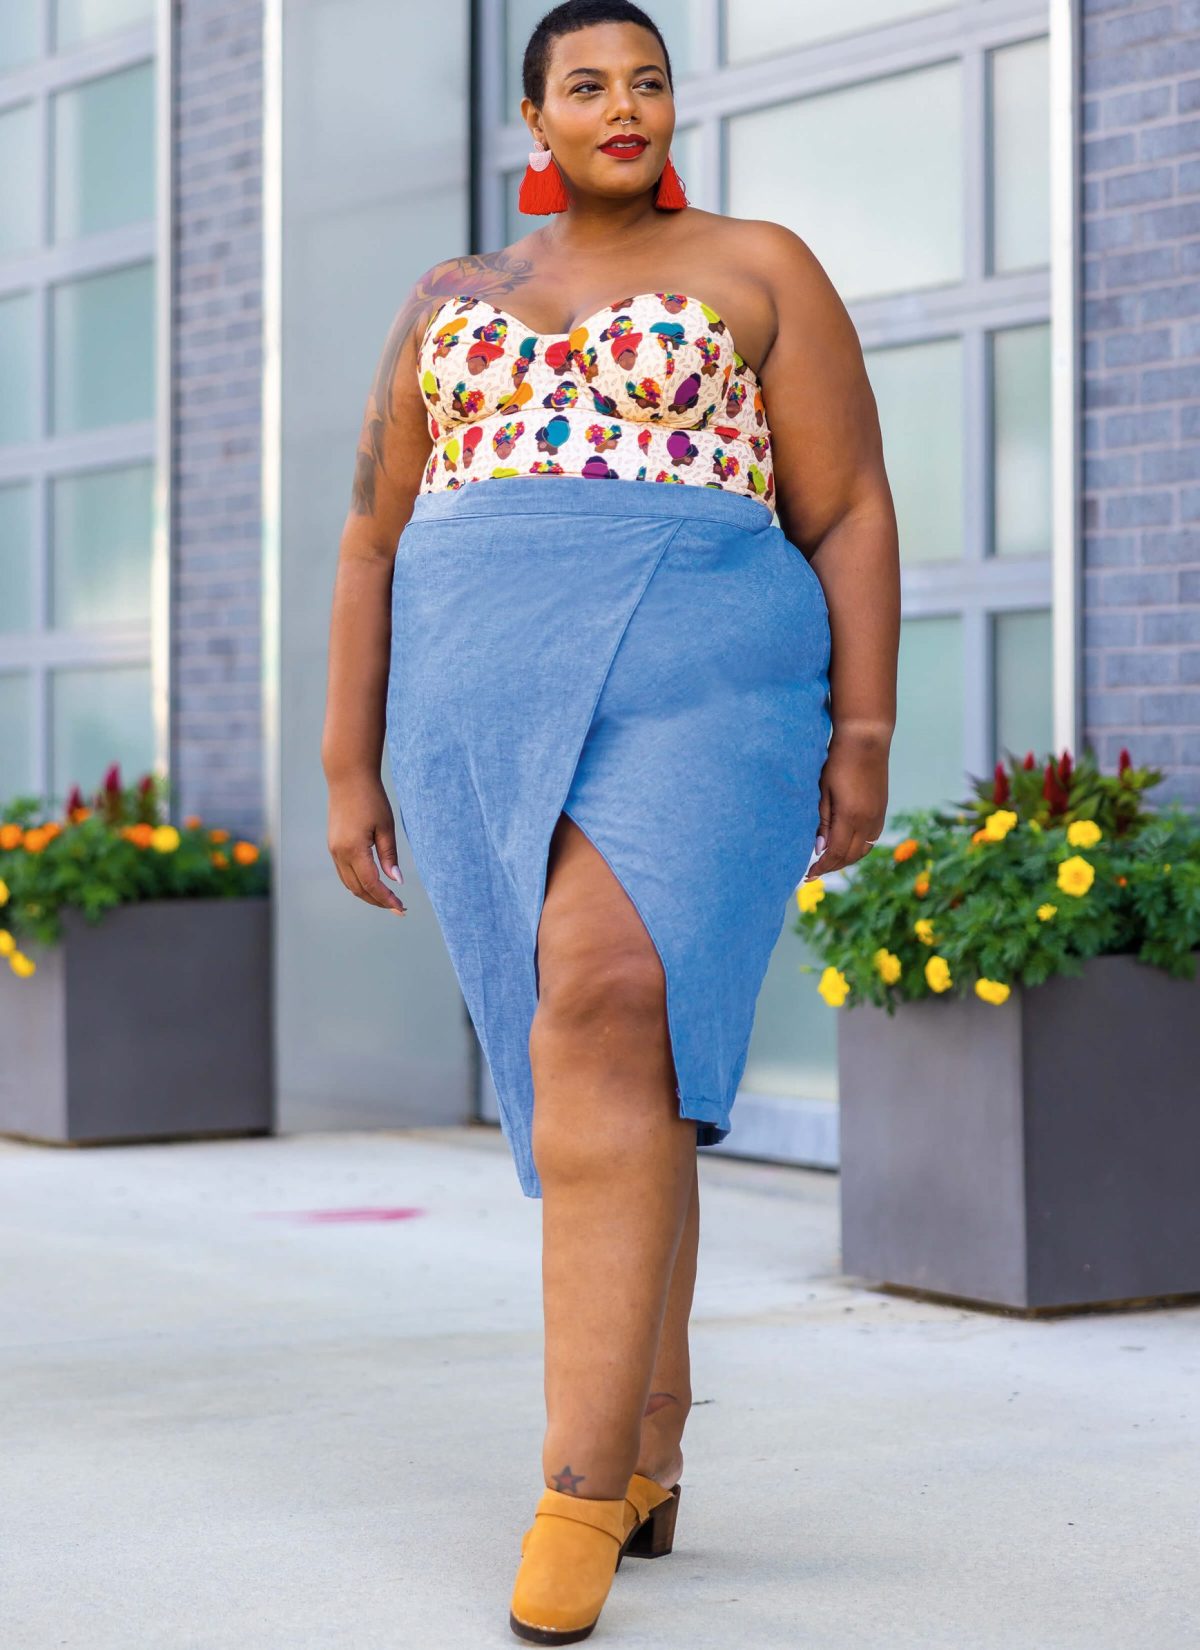 Know Me Sewing Pattern ME2015 Women's Lined Bustier and Skirt by Aaronica B. Cole